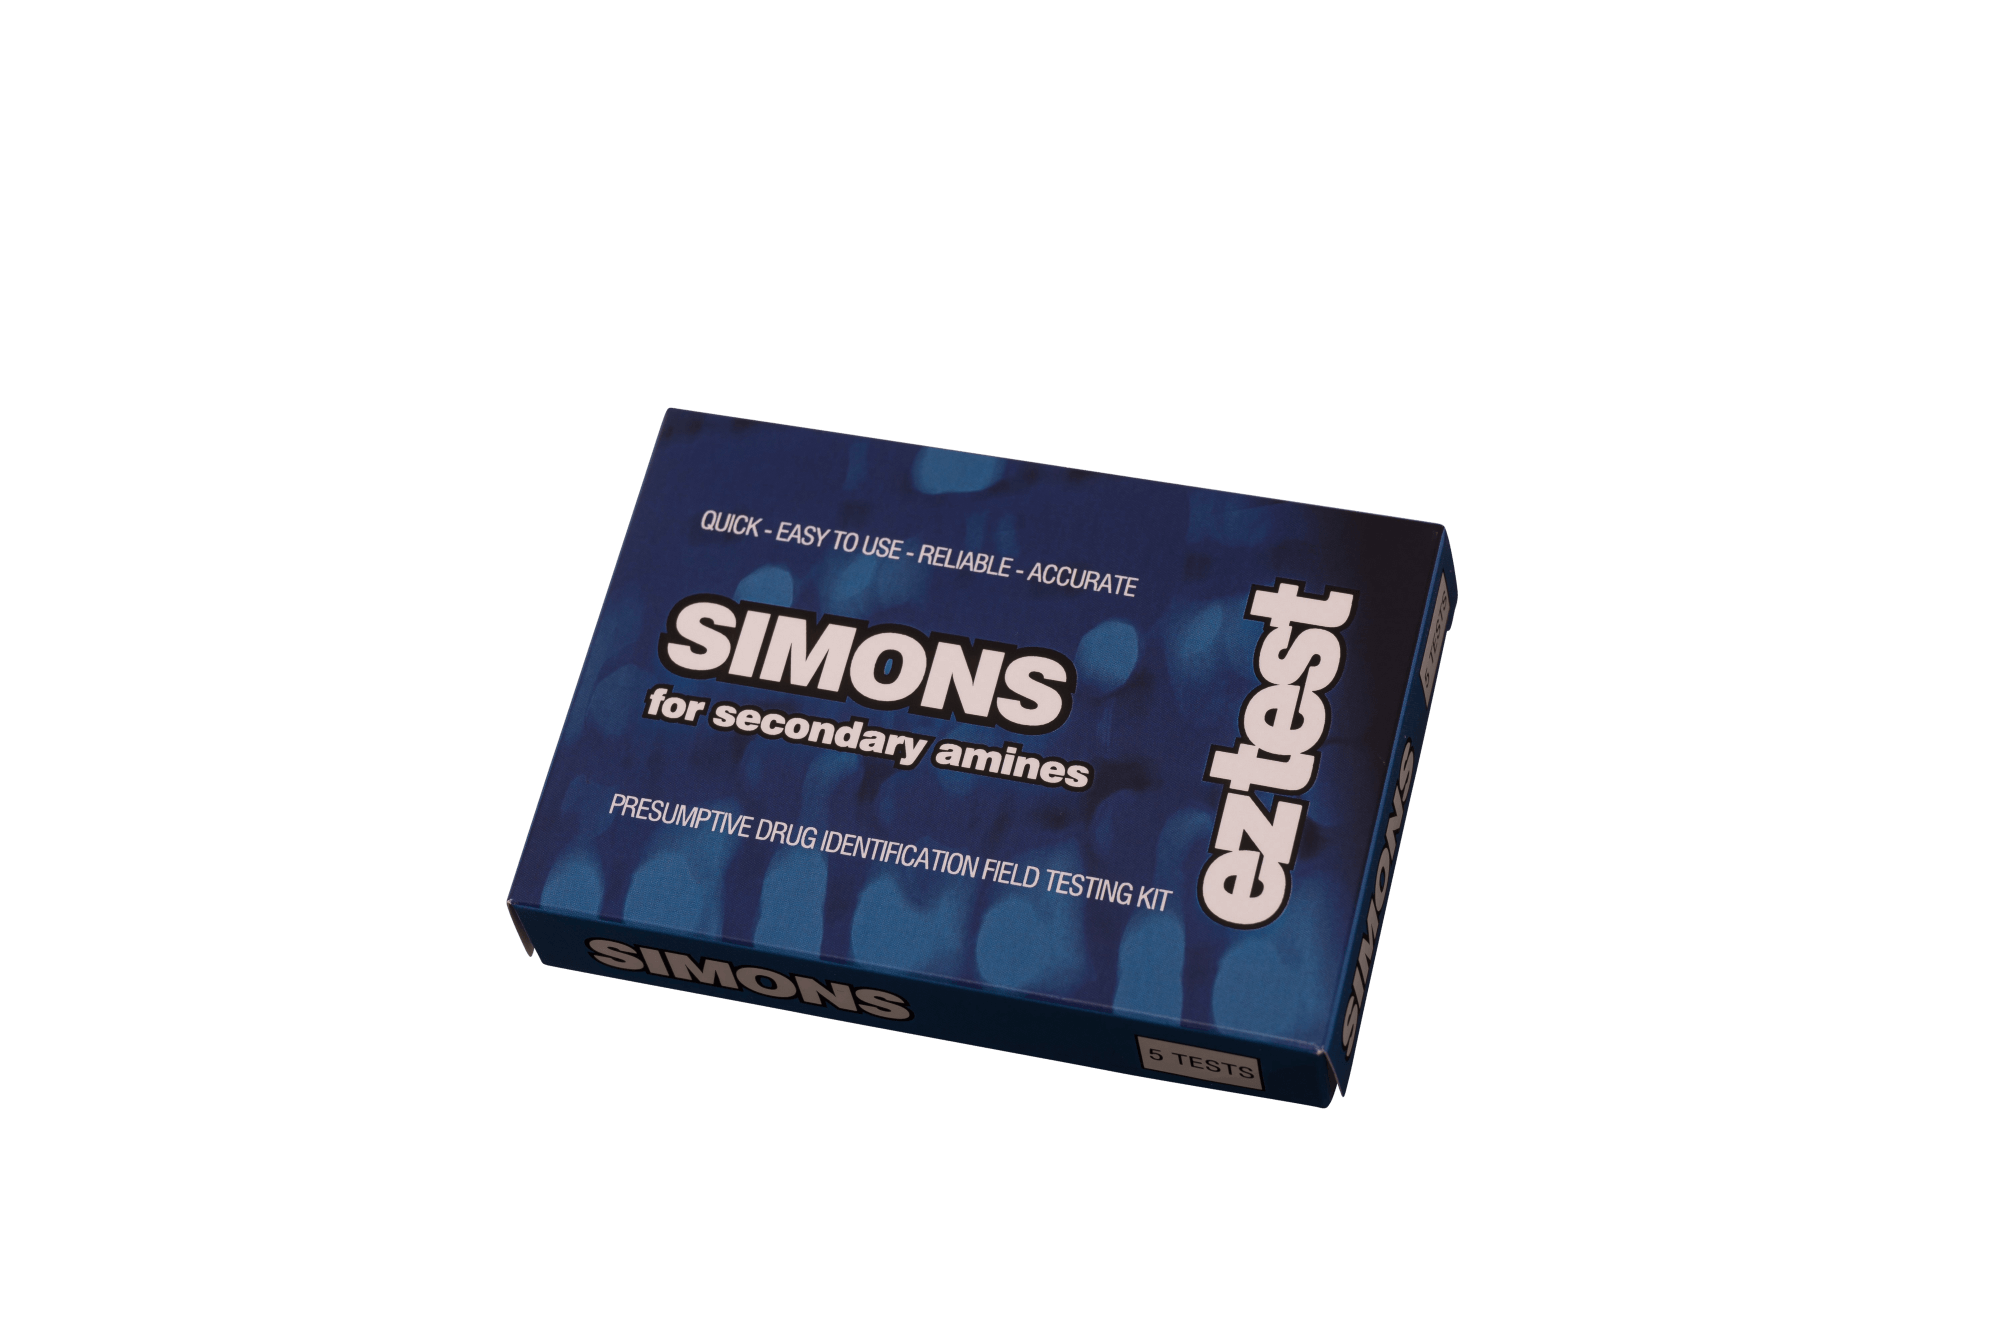 Simons Reagent for Secondary Amines 10 Use Drug Testing Kit